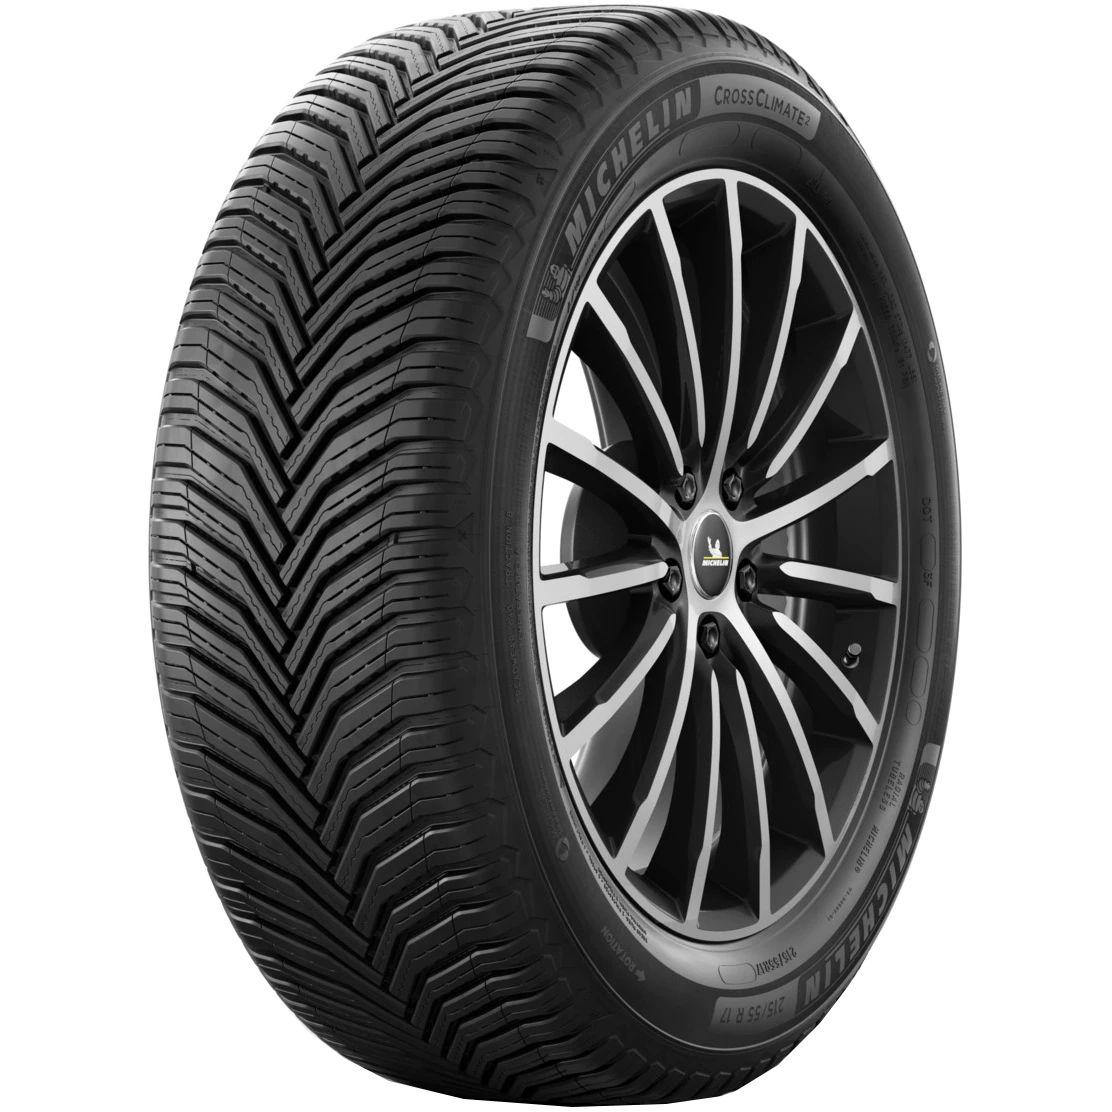 Anvelope all seasons MICHELIN CrossClimate2 M+S XL 235/40 R18 95Y